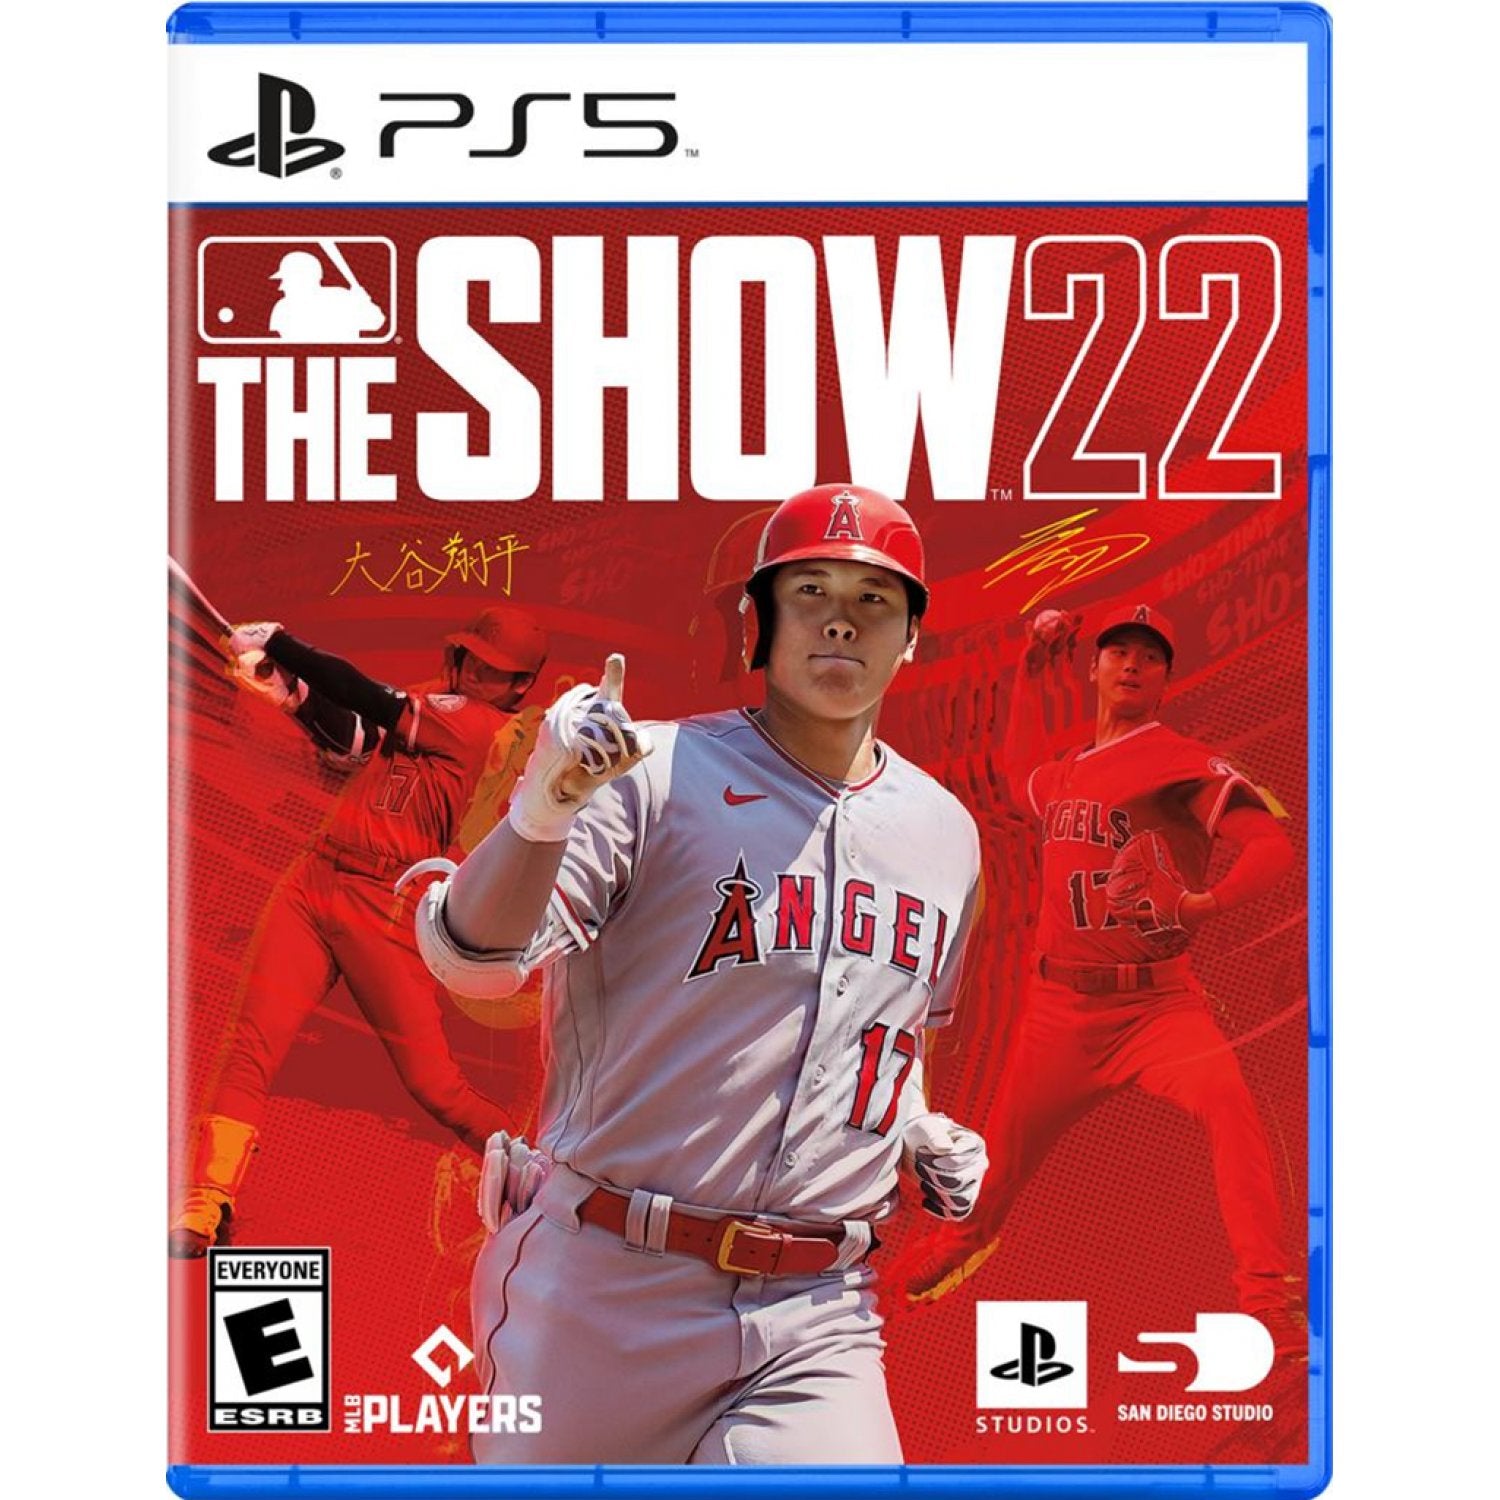 PS5 MLB The Show 22